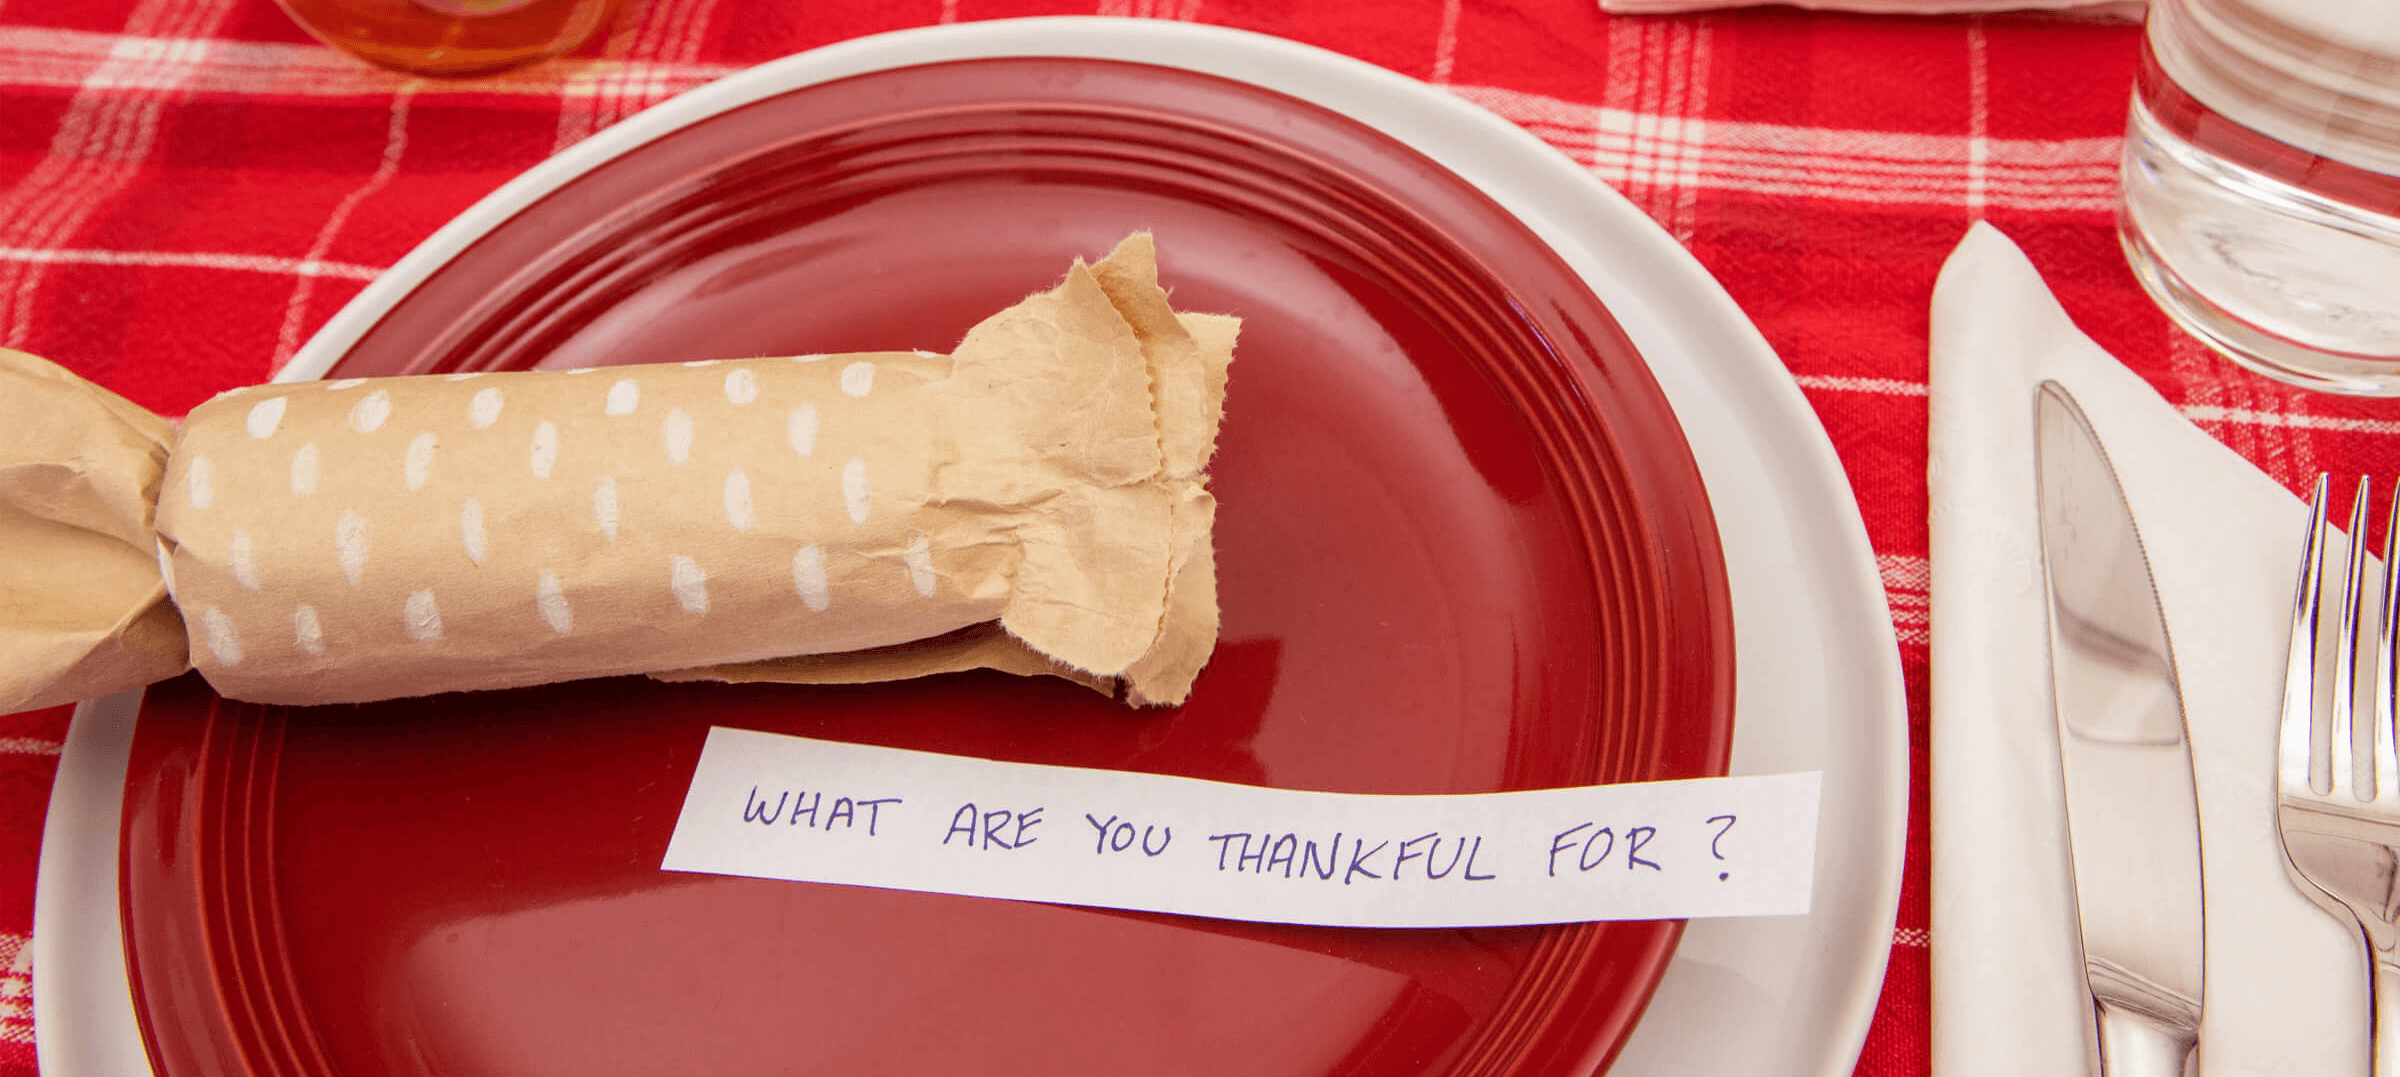 What are you thankful for message on top of a red plate.